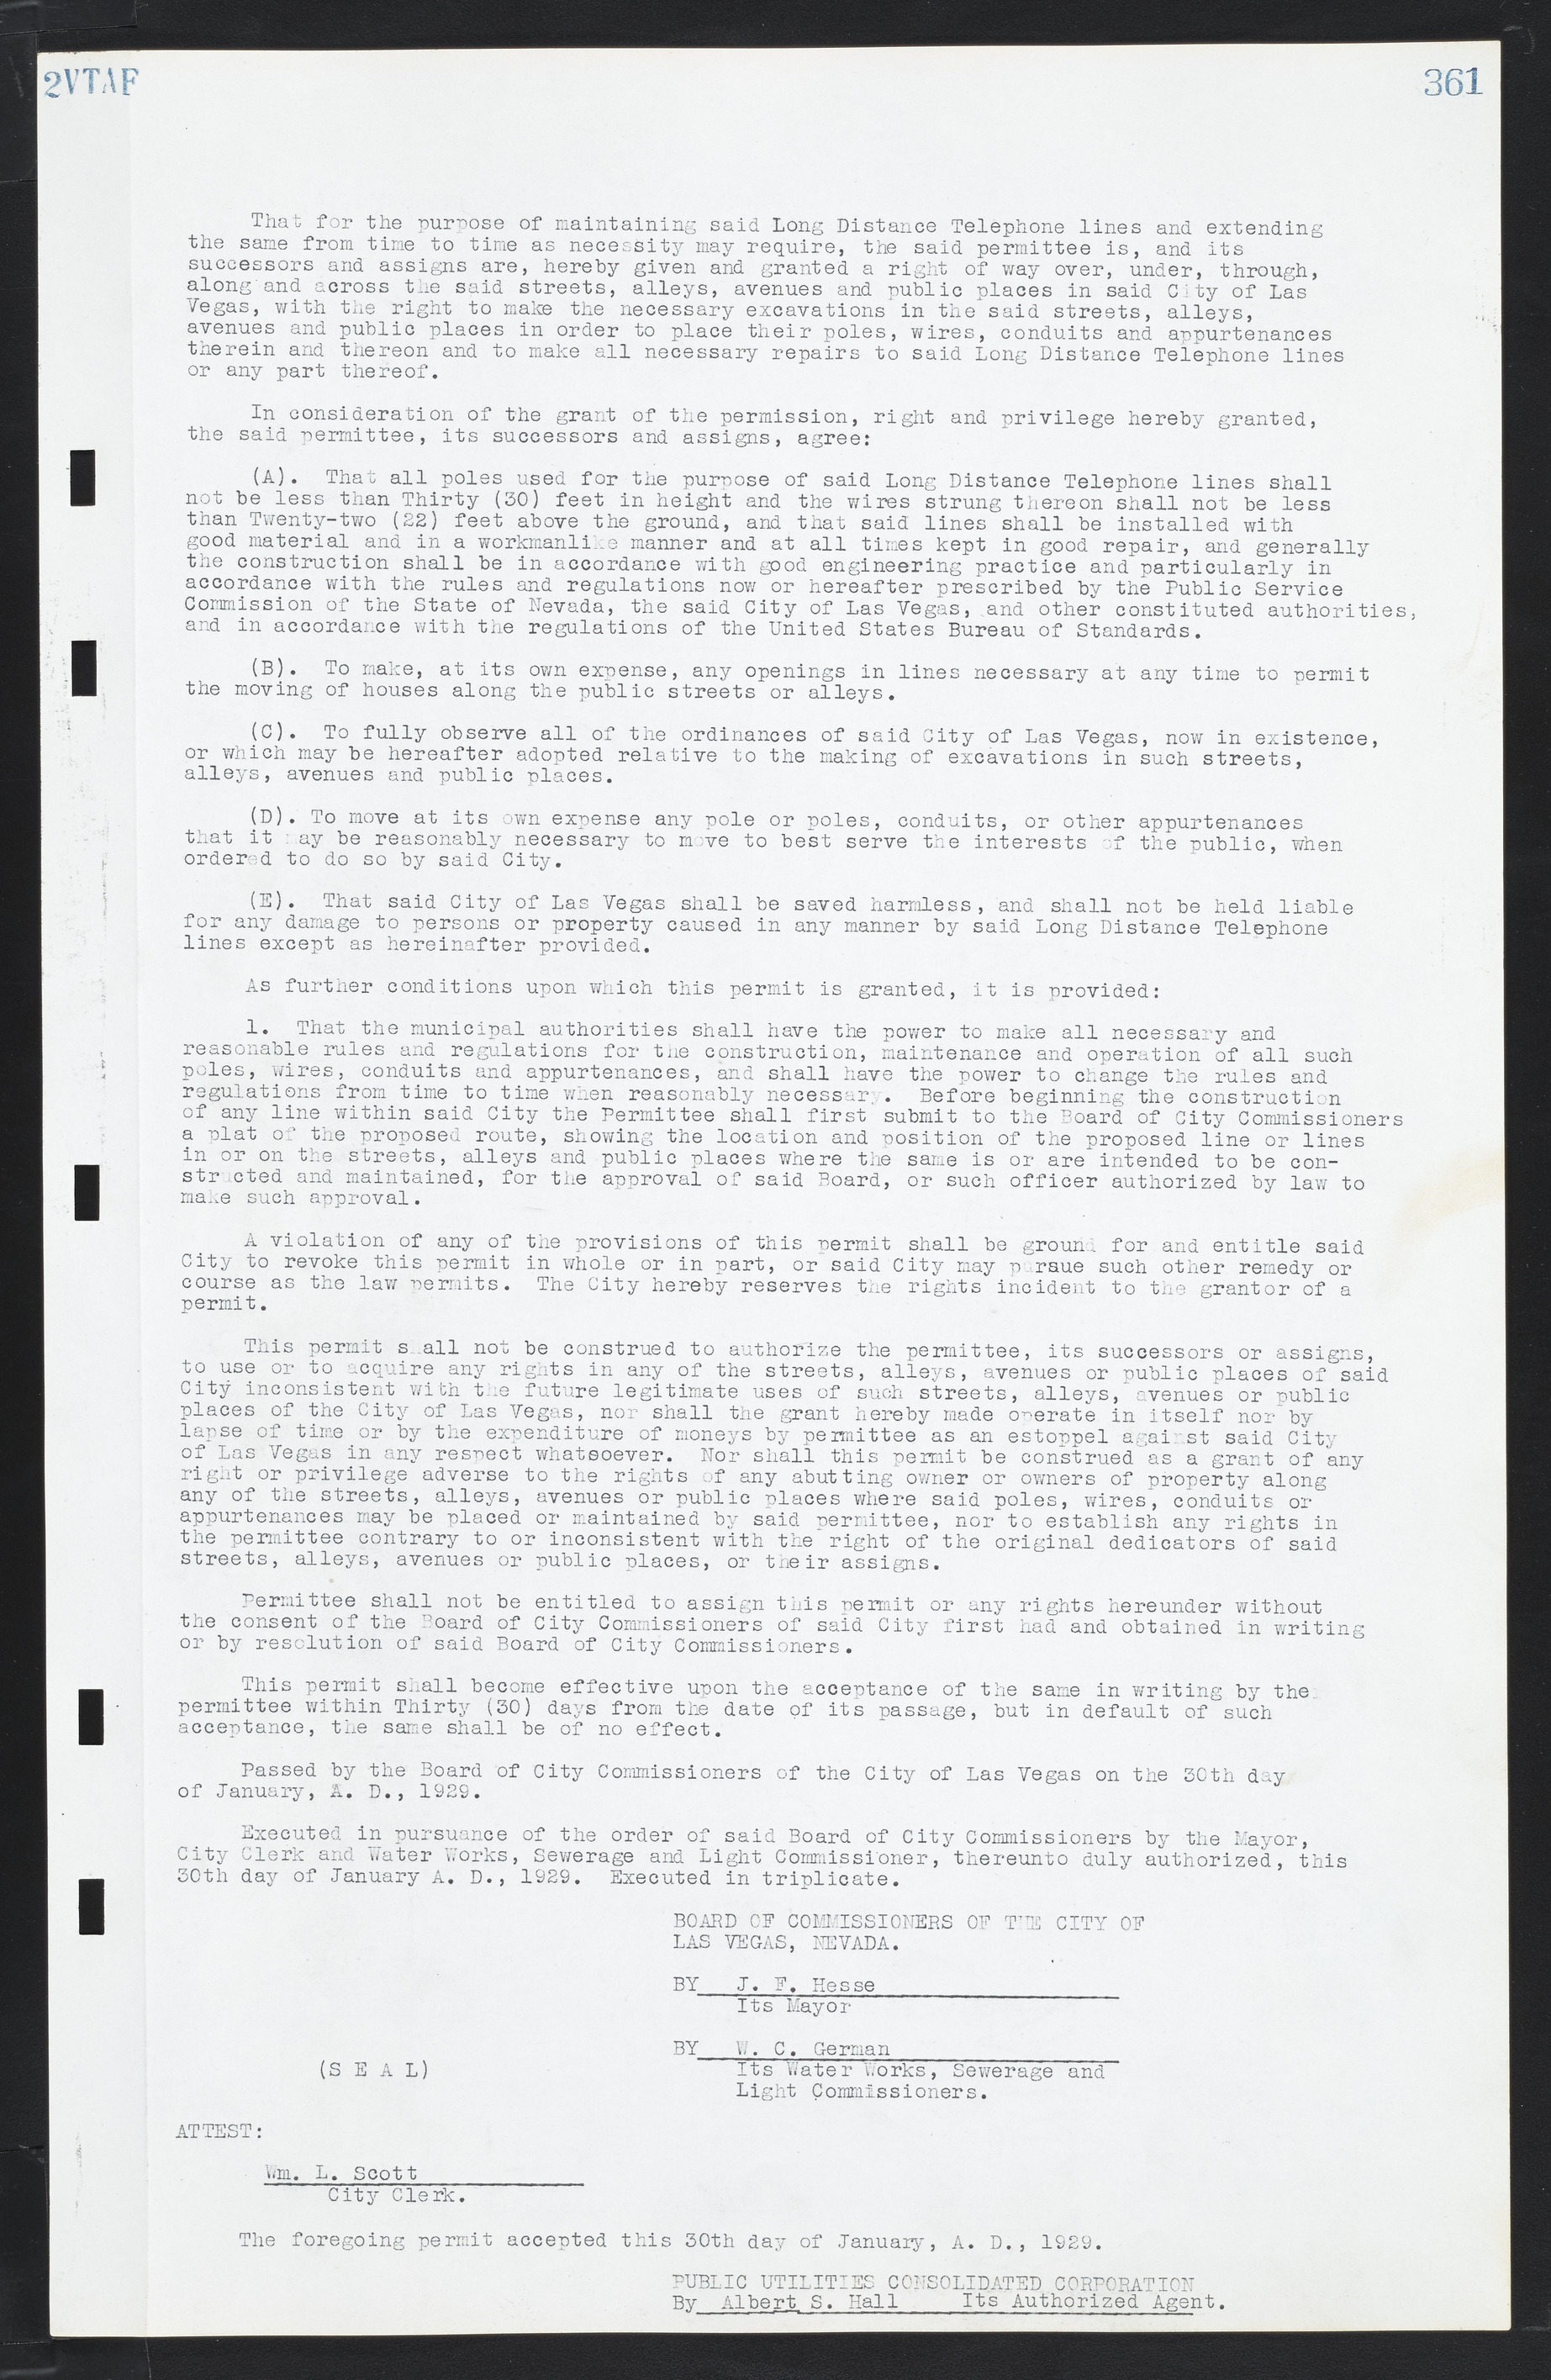 Las Vegas City Commission Minutes, March 1, 1922 to May 10, 1929, lvc000002-370